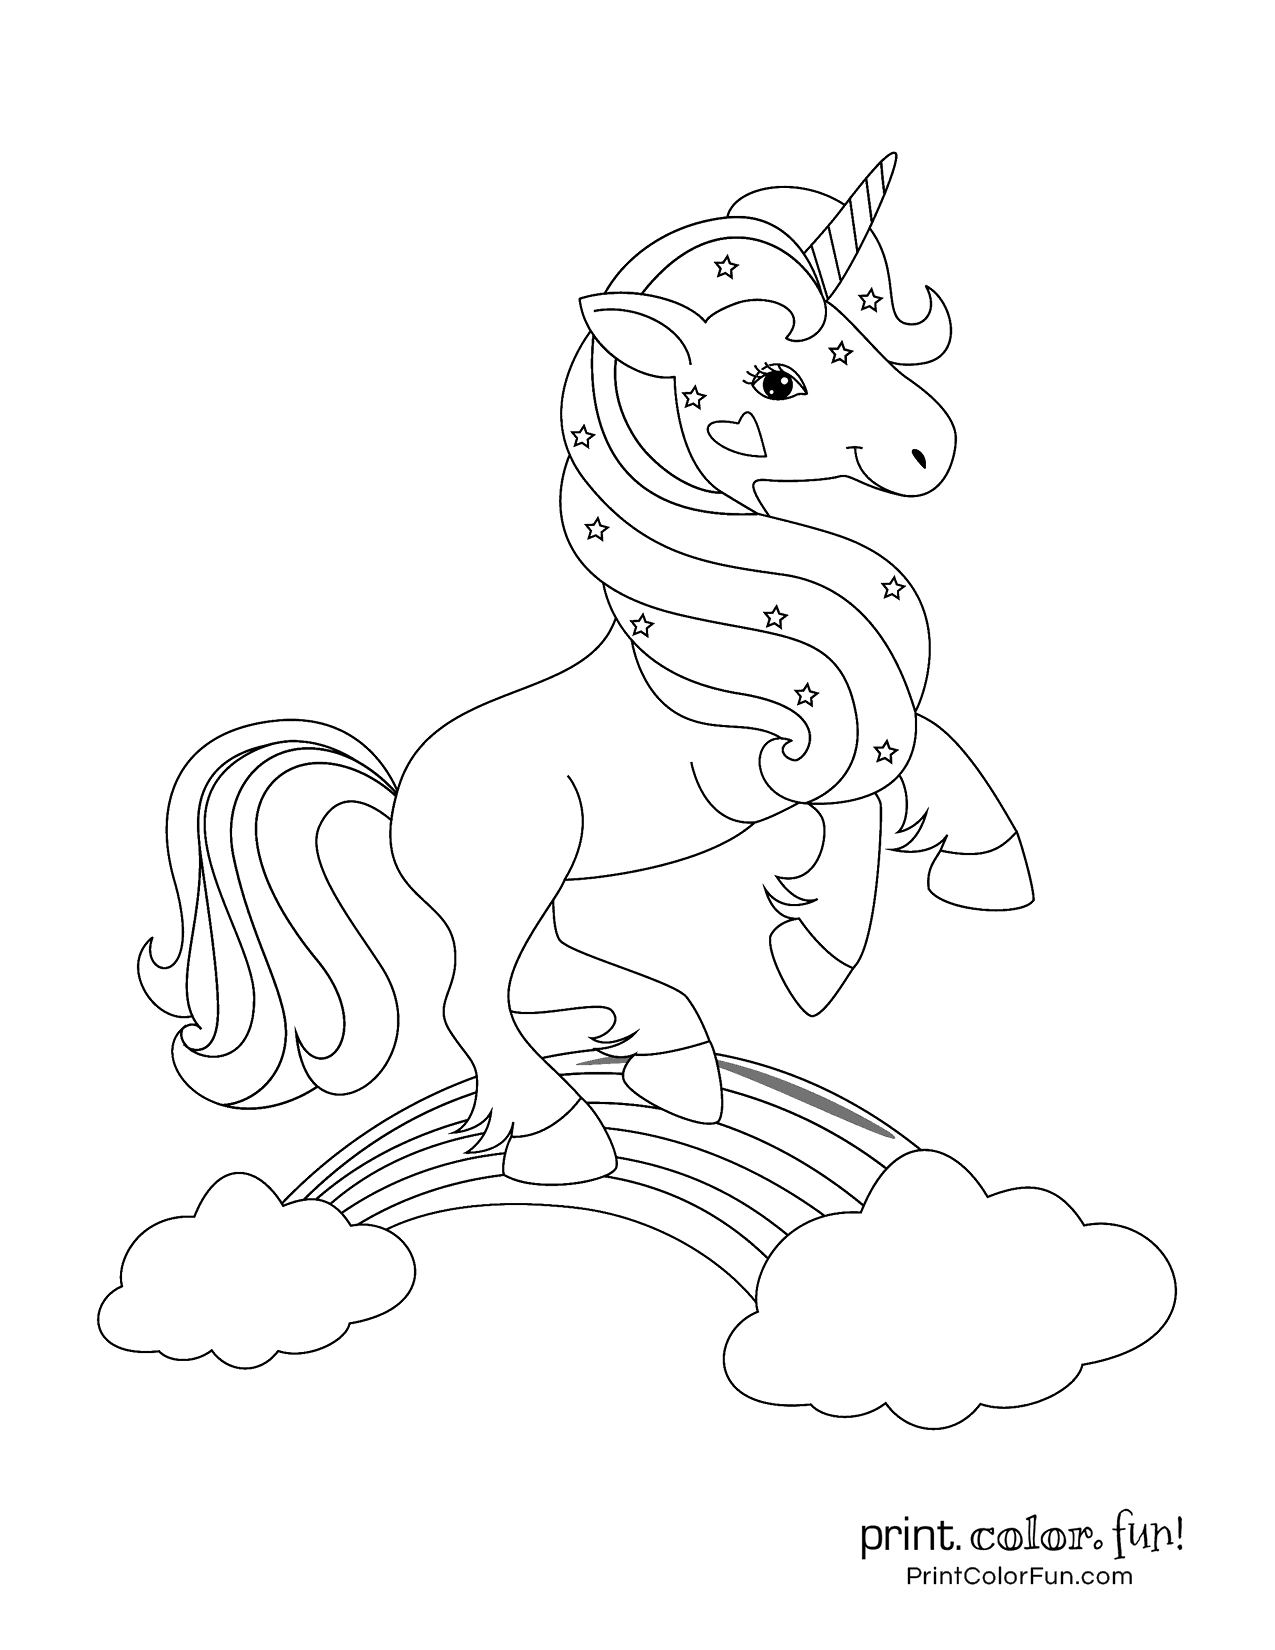 Little Unicorn Coloring Page